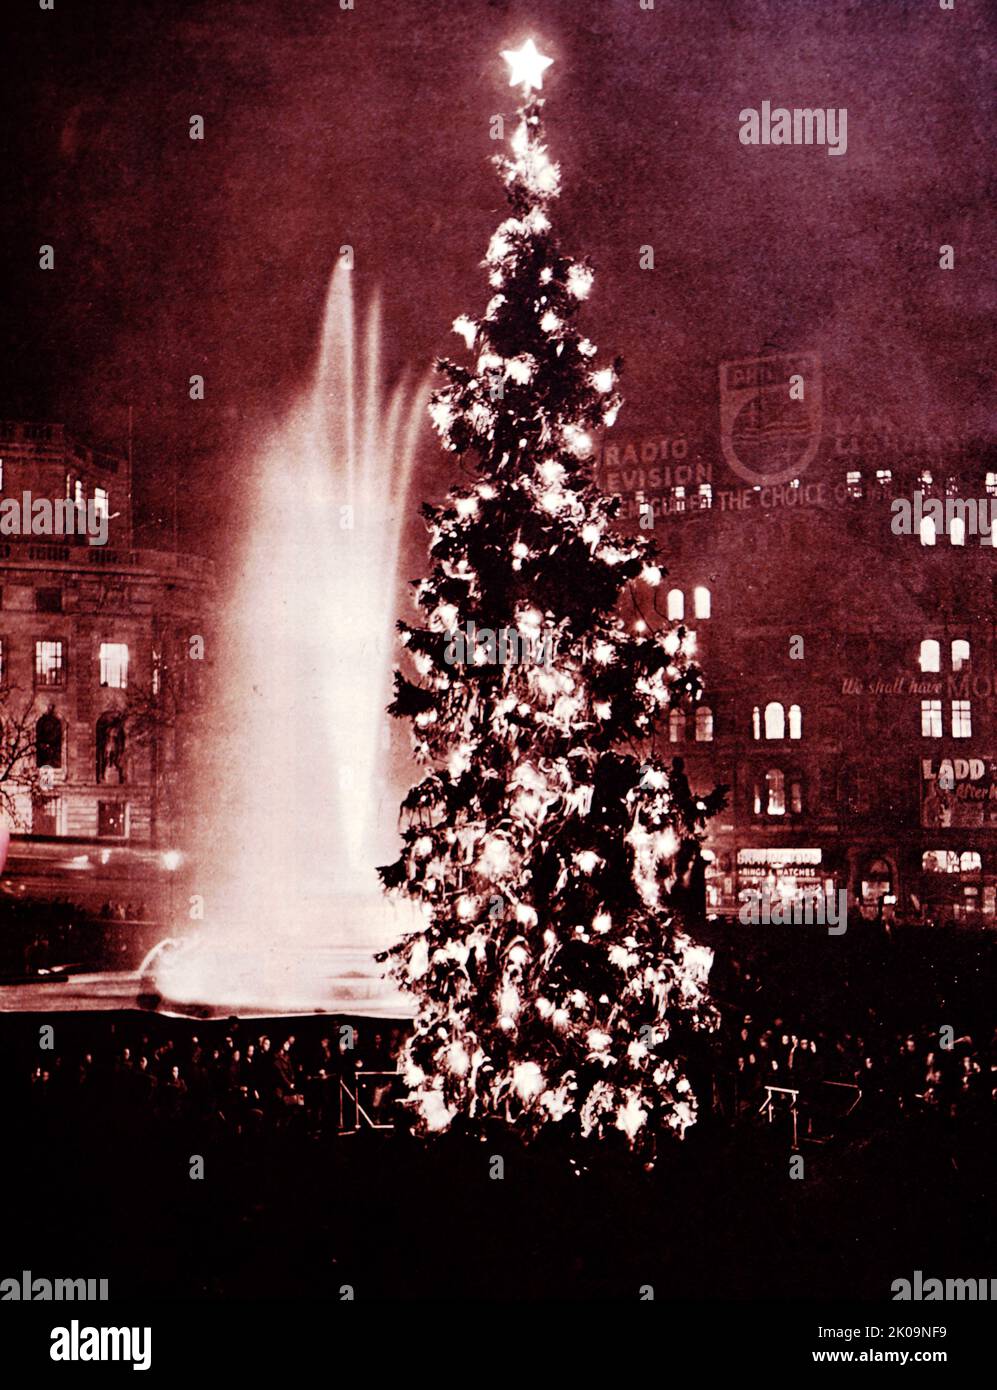 Norway's gesture of goodwill to London: The giant Christmas tree in Trafalgar Square, London. Stock Photo